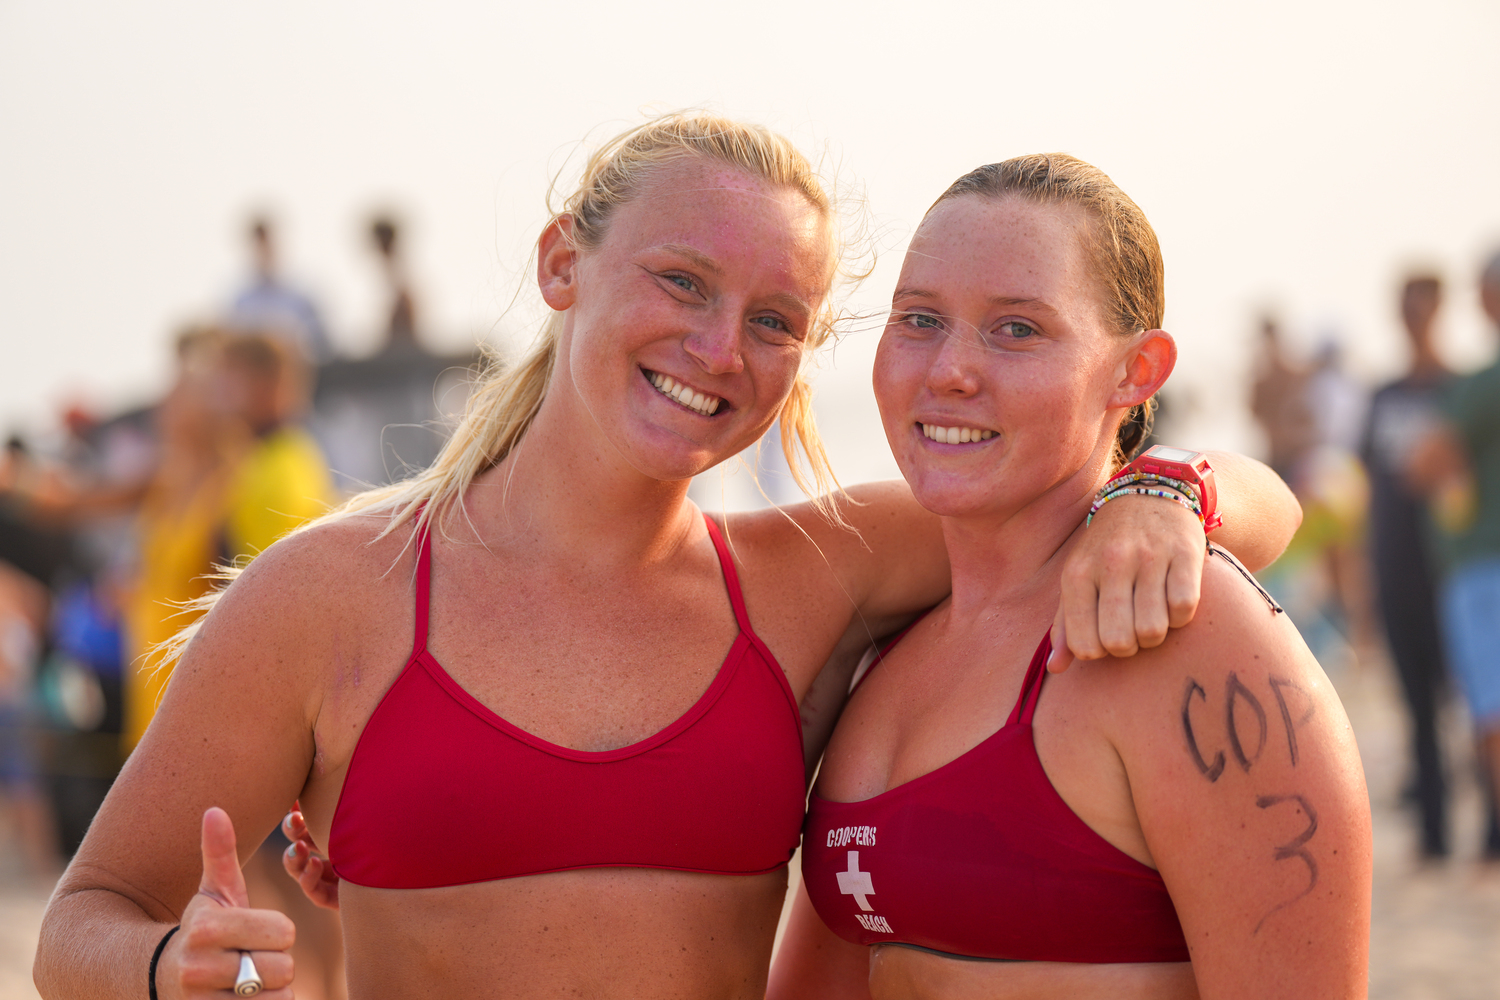 Fire Island lifeguard Kiersten DeCamp, left, and Southampton lifeguard Evie Purcell at the Main Beach Lifeguard Tournament on Thursday, July 27.   RON ESPOSITO